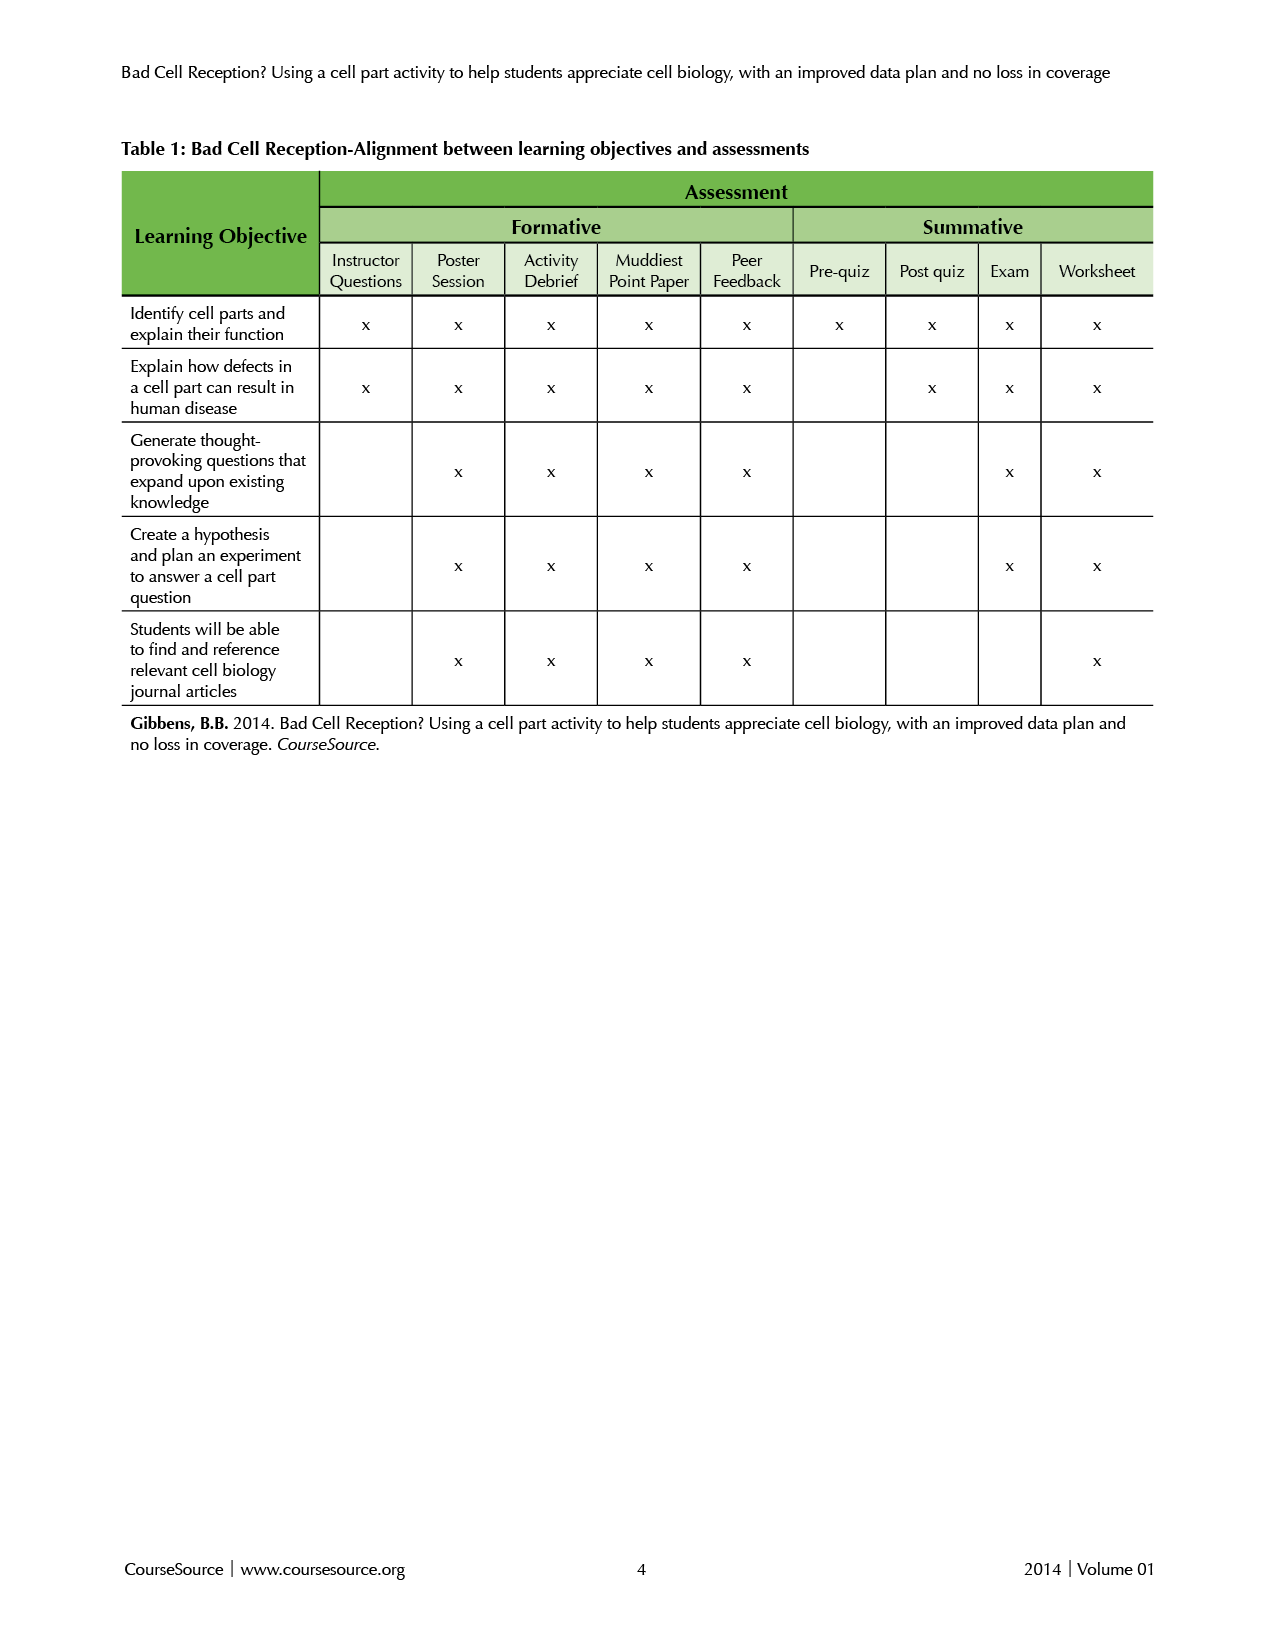 Table 1. Bad Cell Reception-Alignment between learning objectives and assessments